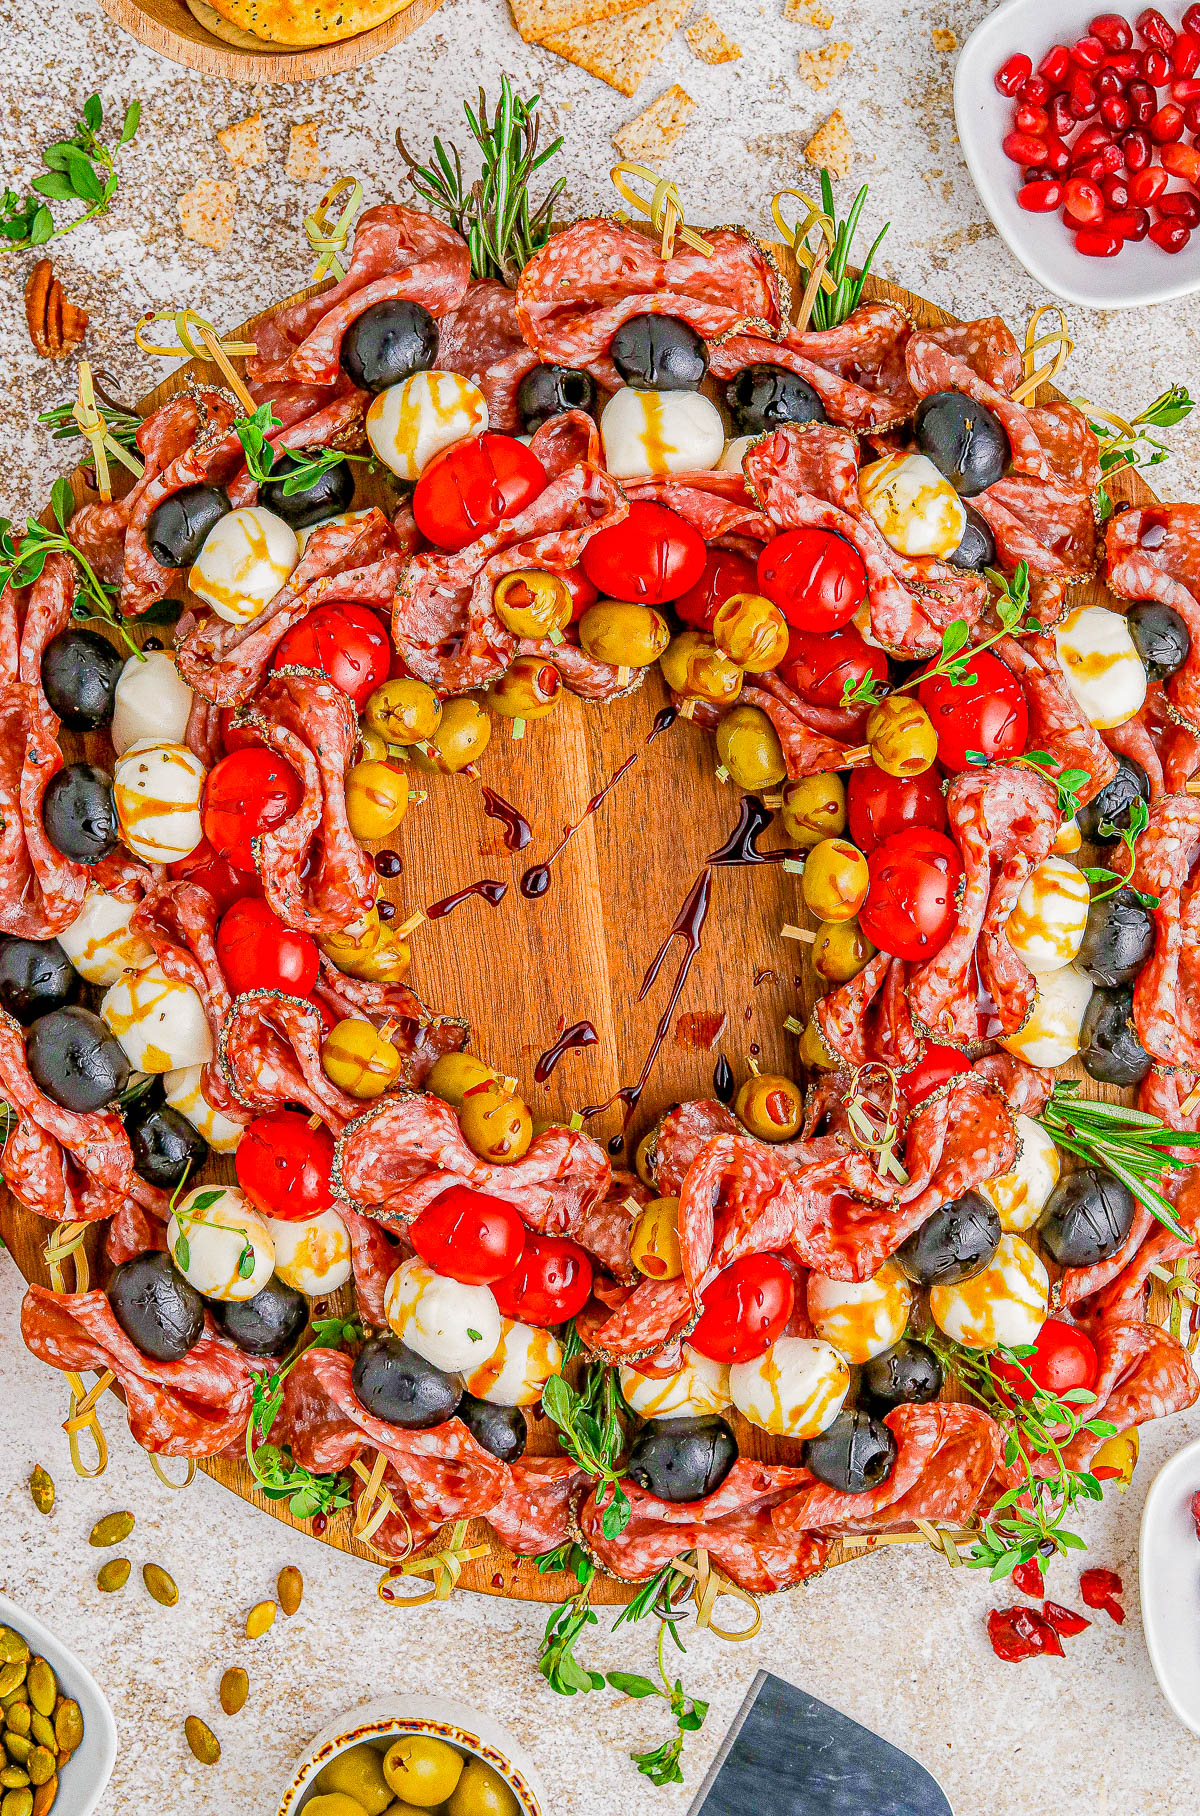 Holiday Antipasto Wreath - A fun and festive Christmas or New Year's Eve appetizer recipe idea that's so FAST and EASY to make! Skewered salami, mozzarella, tomatoes, olives, fresh herbs, and more come together to form the wreath. Mix-and-match the ingredients based on your favorites. You can prep it ahead of your party or event and when your guests see this, I guarantee everyone's eyes will light up! 